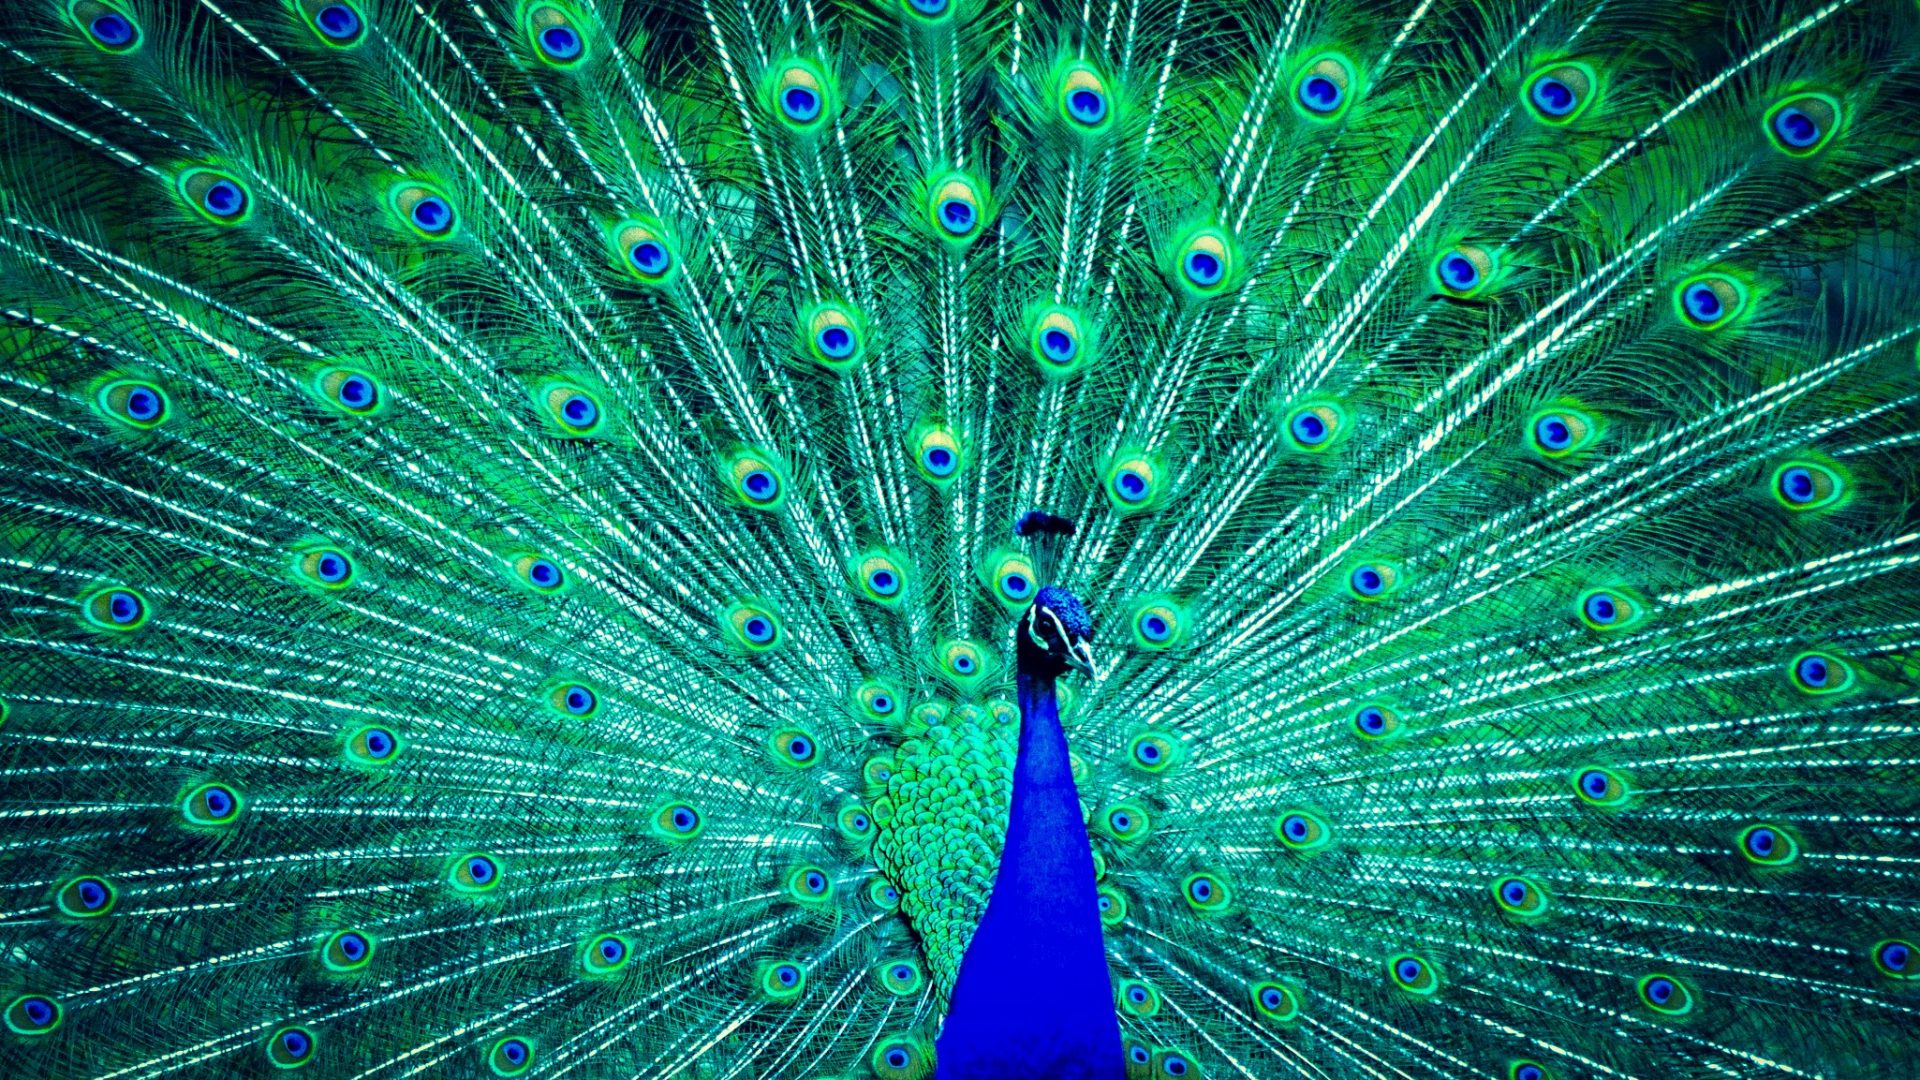 Blue Feather Green Peacock 1920x1080